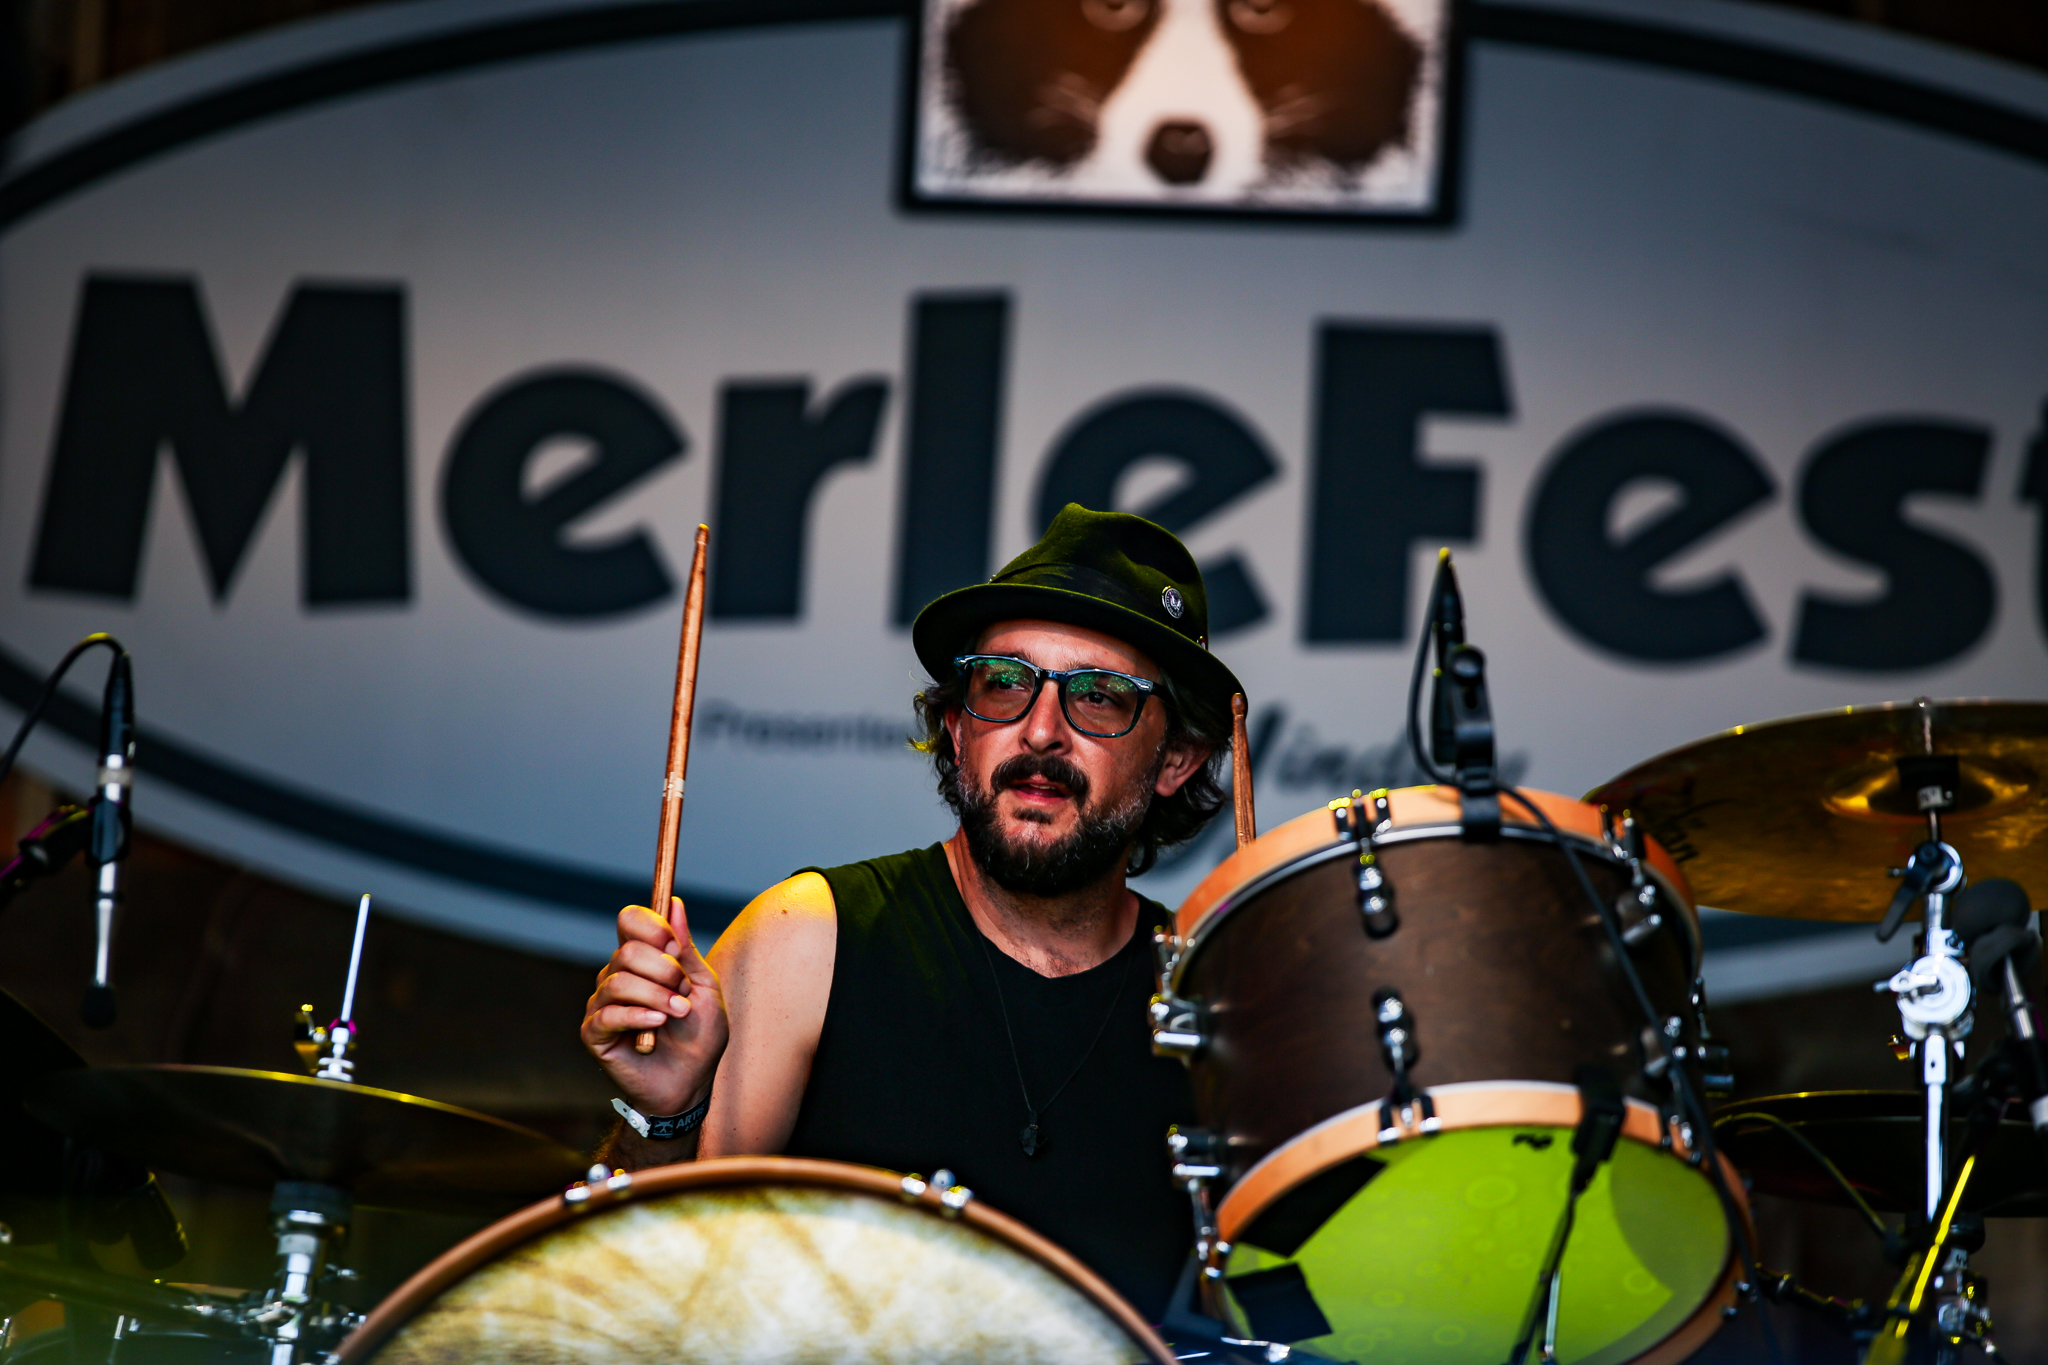 Light Shifter Studios Photographs Merlefest and does a photography recap to showcase photos